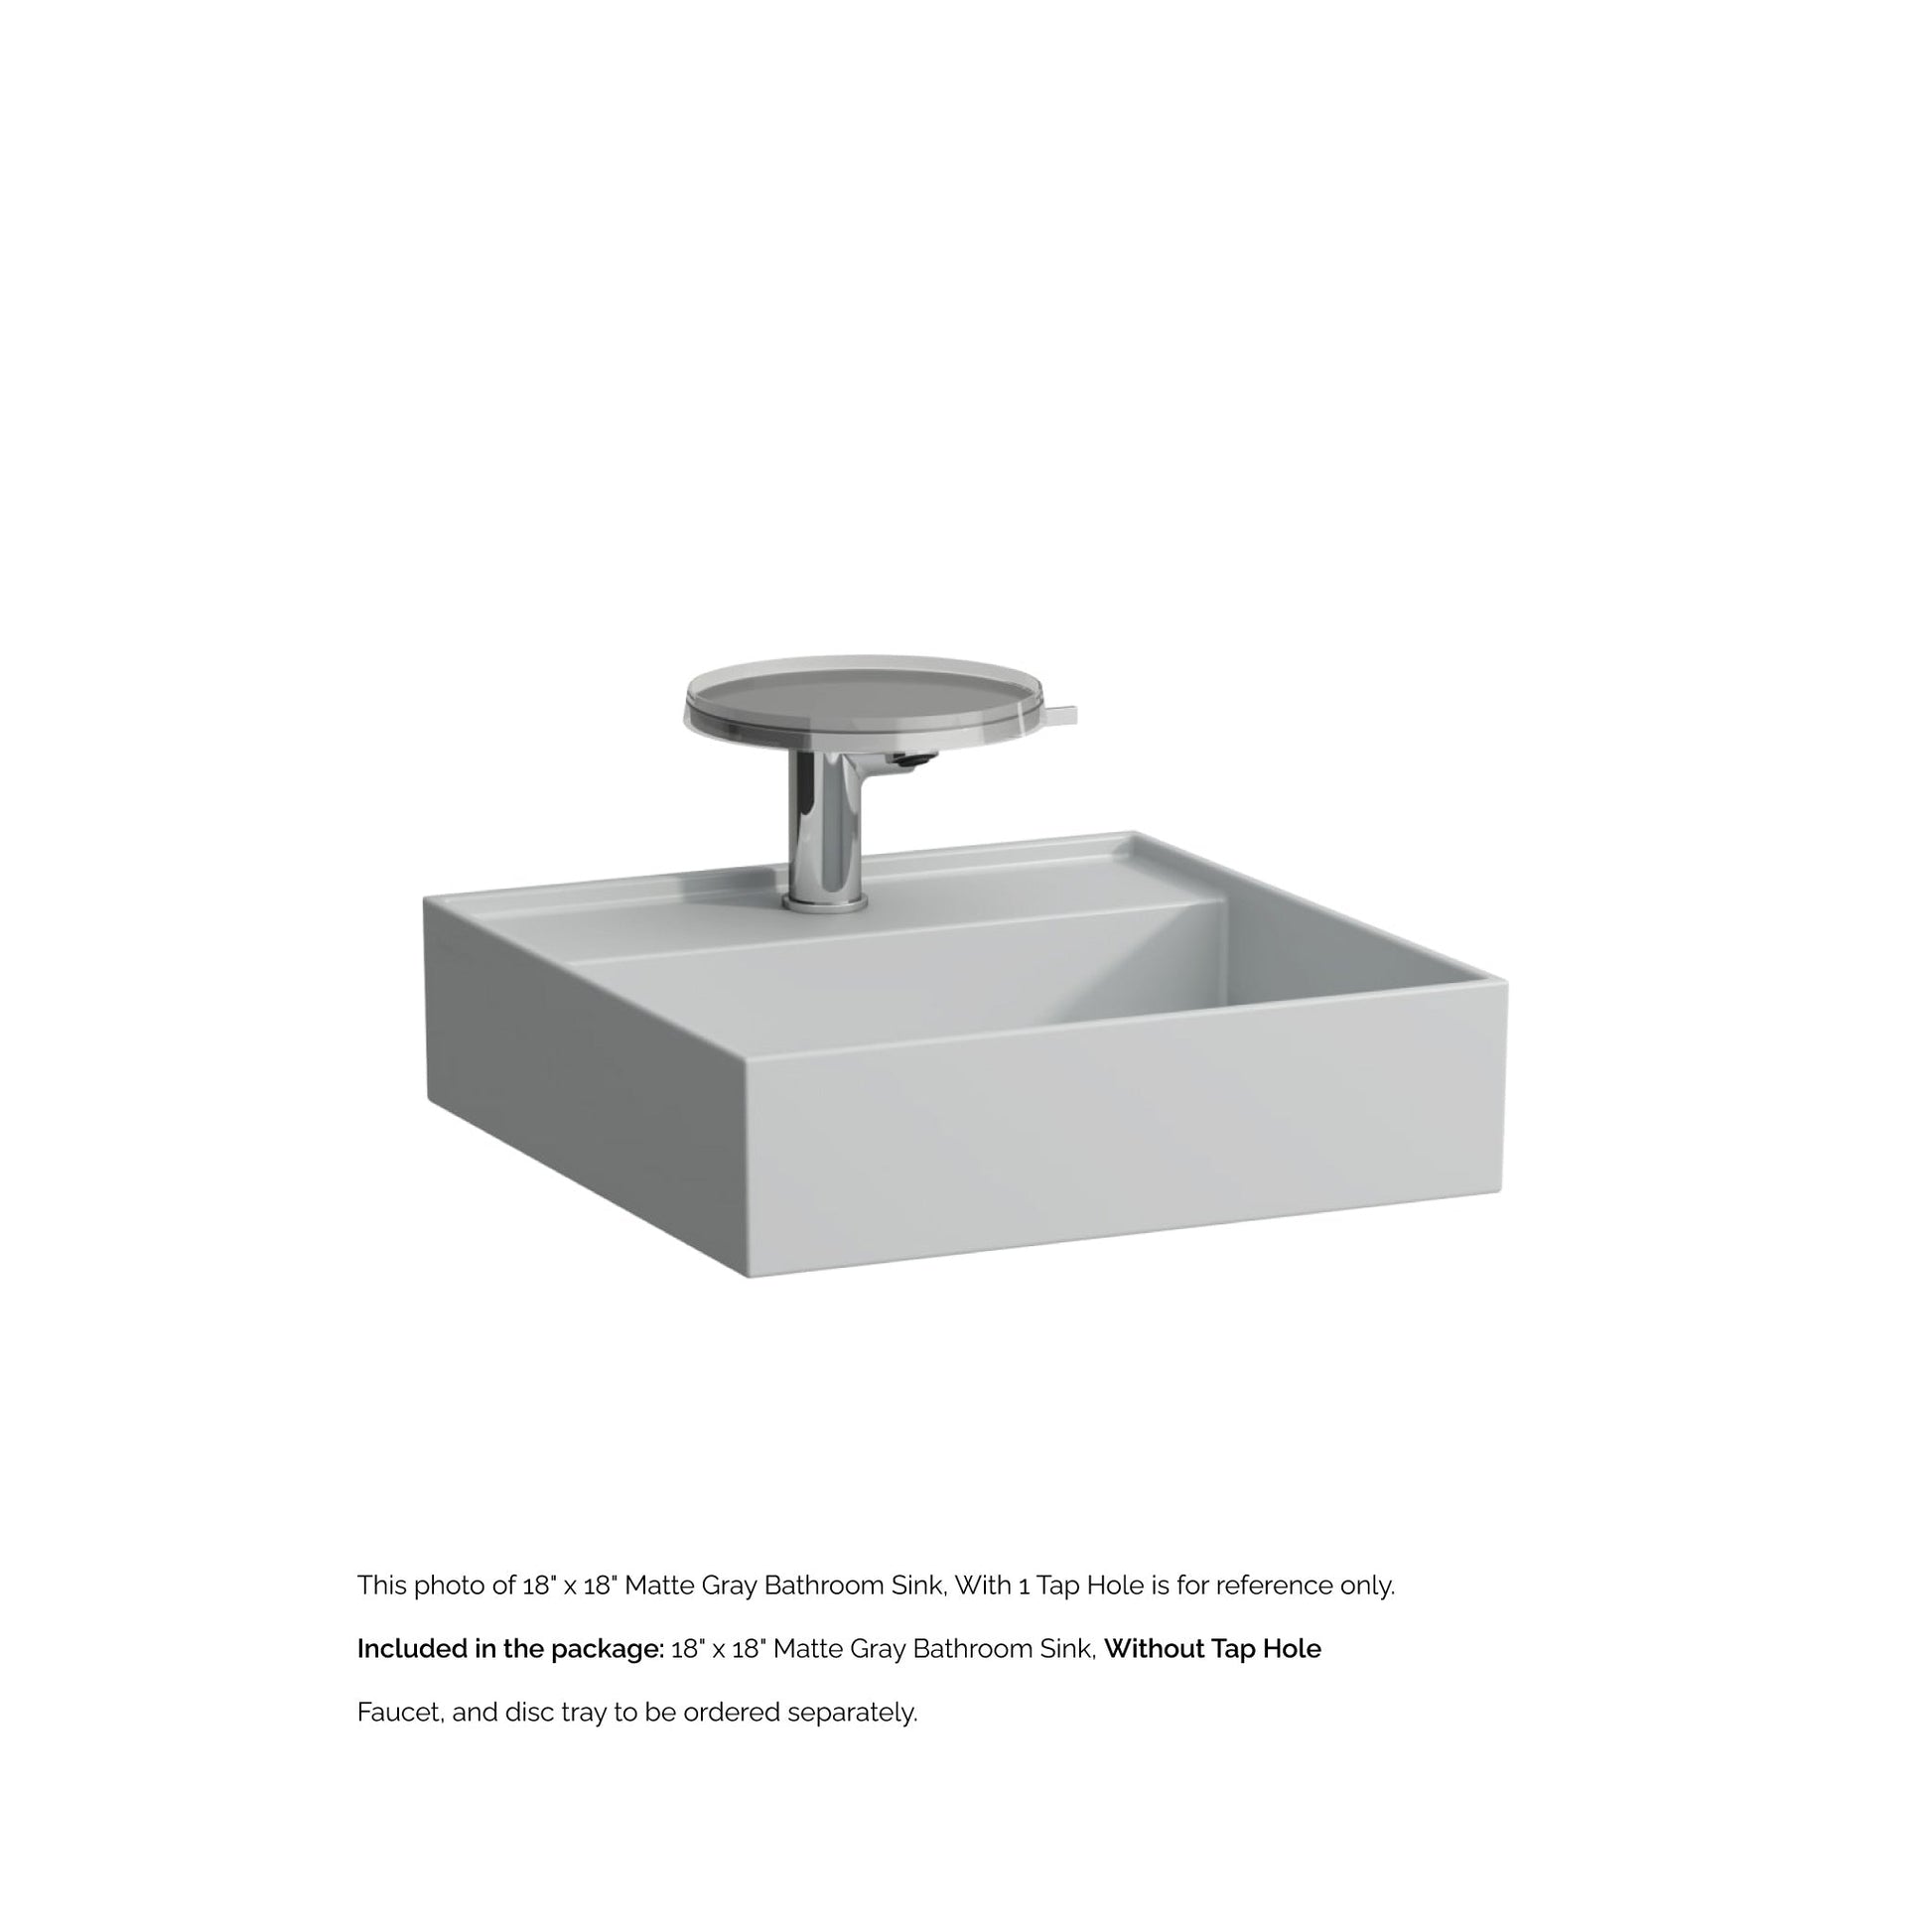 Laufen Kartell 18" x 18" Matte Gray Wall-Mounted Bathroom Sink Without Faucet Hole